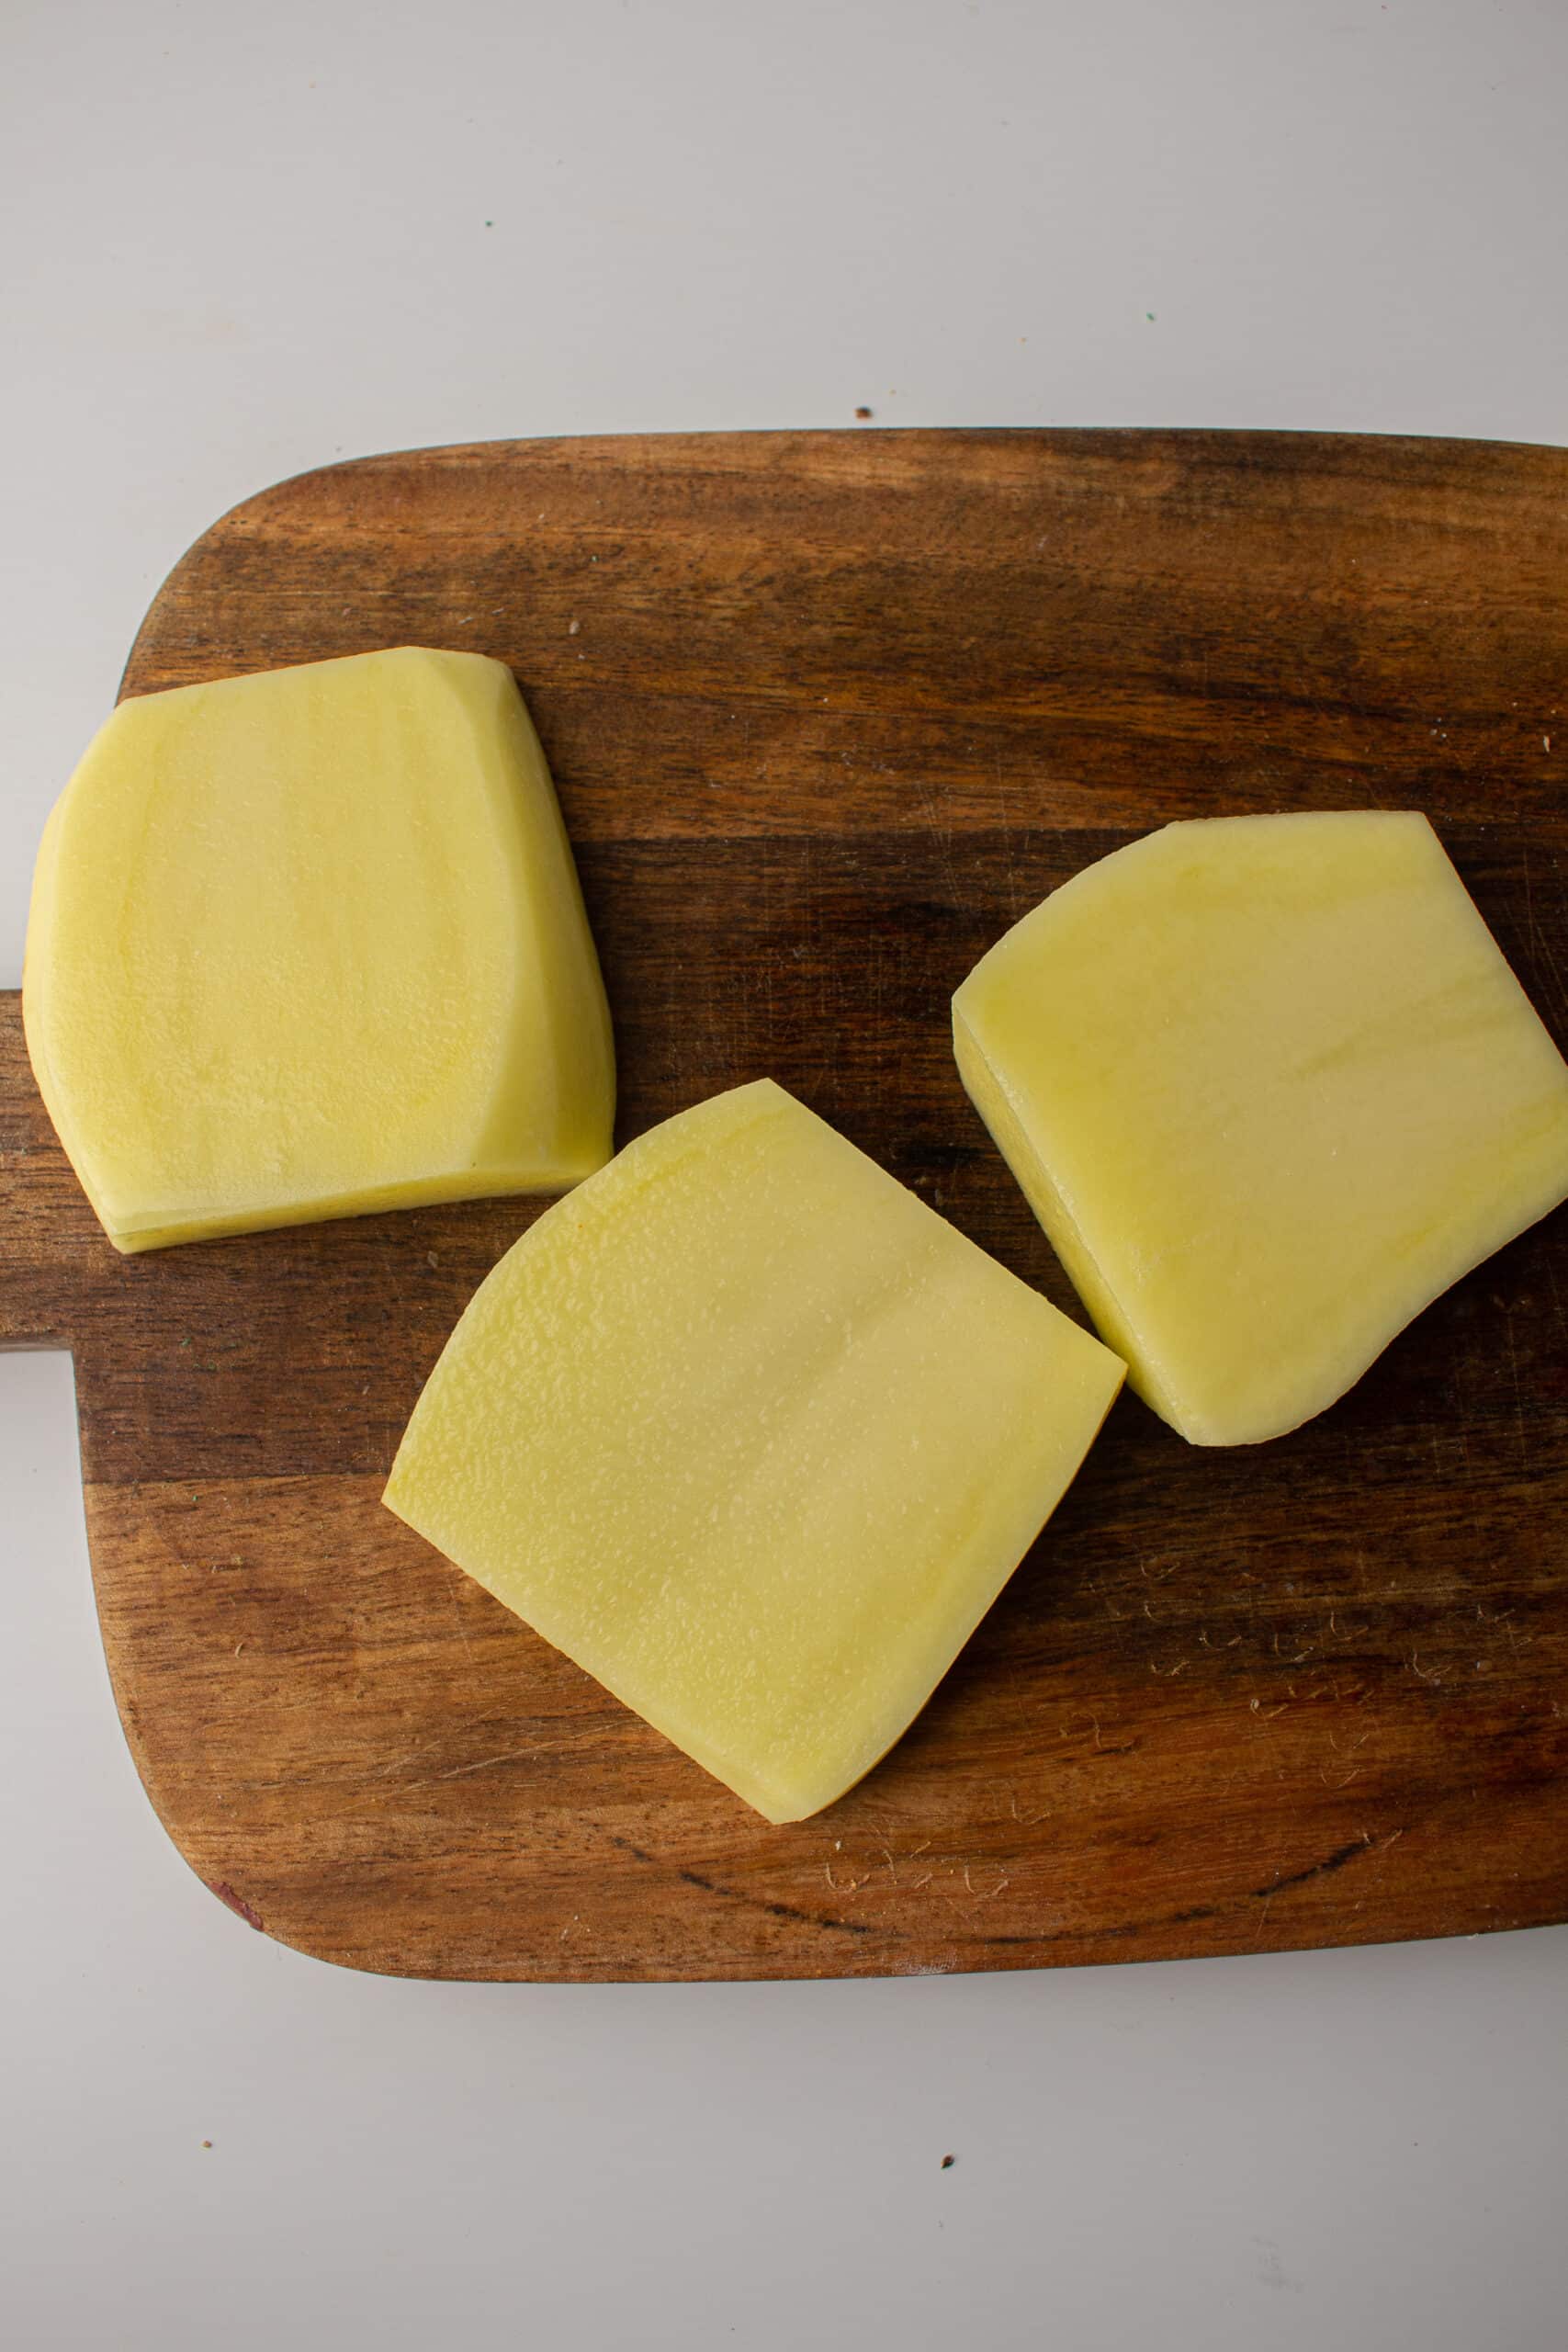 Slicing potatoes into 1cm slices